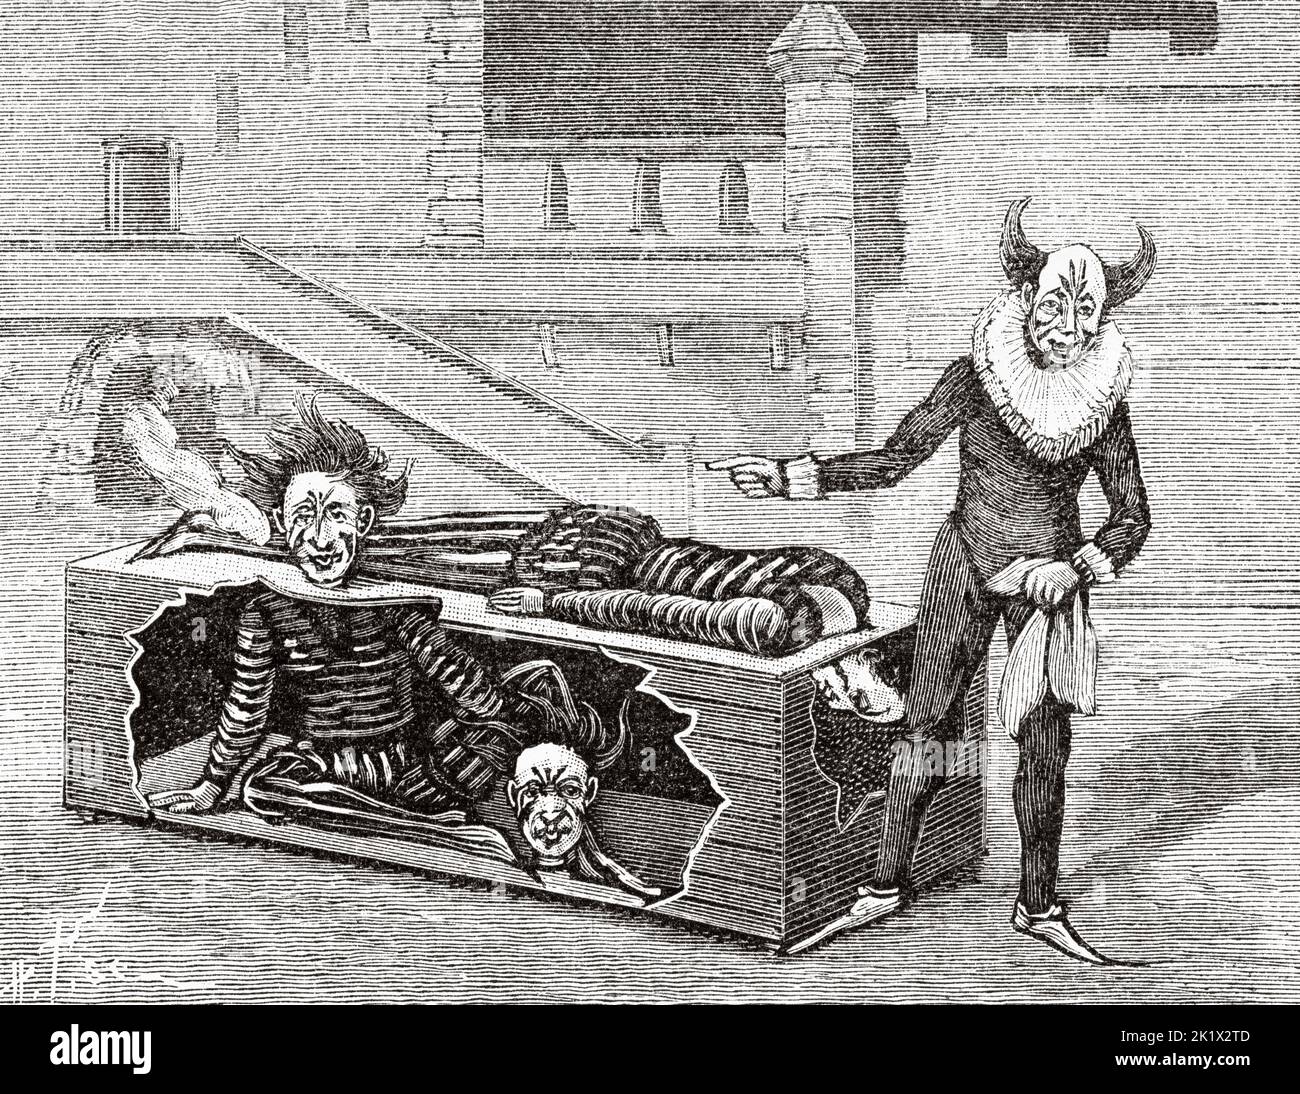 The beheaded man, scene performed by clowns at the Barnum circus in New York, USA. Old 19th century engraved illustration from La Nature 1890 Stock Photo